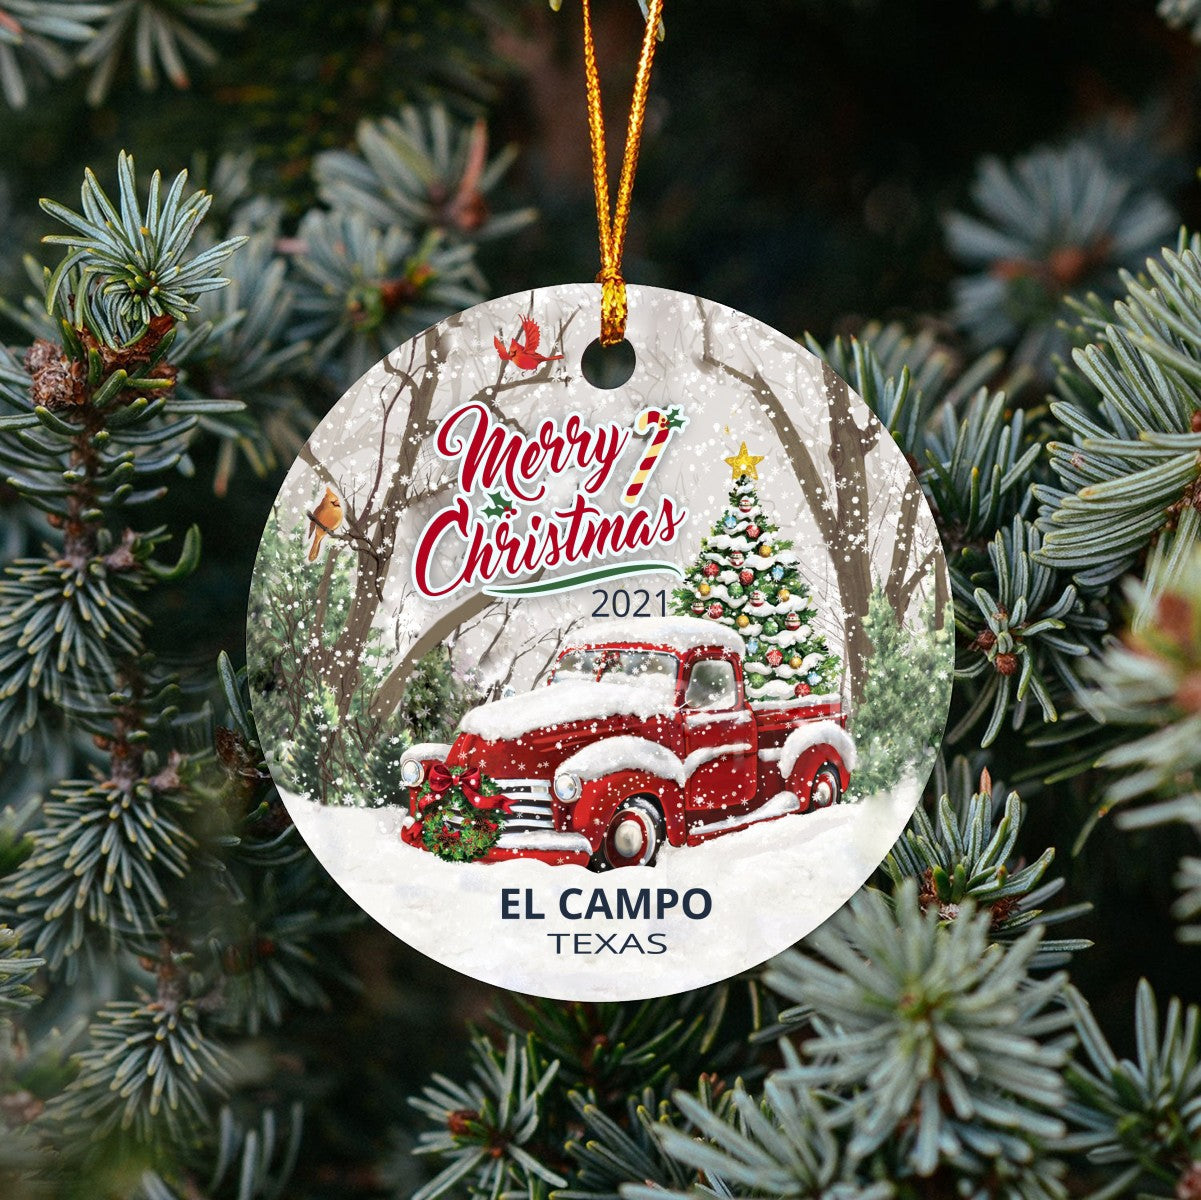 Christmas Tree Ornaments El Campo - Ornament With Name City, State El Campo Texas TX Ornament - Red Truck Xmas Ornaments 3'' Plastic Gift For Family, Friend And Housewarming